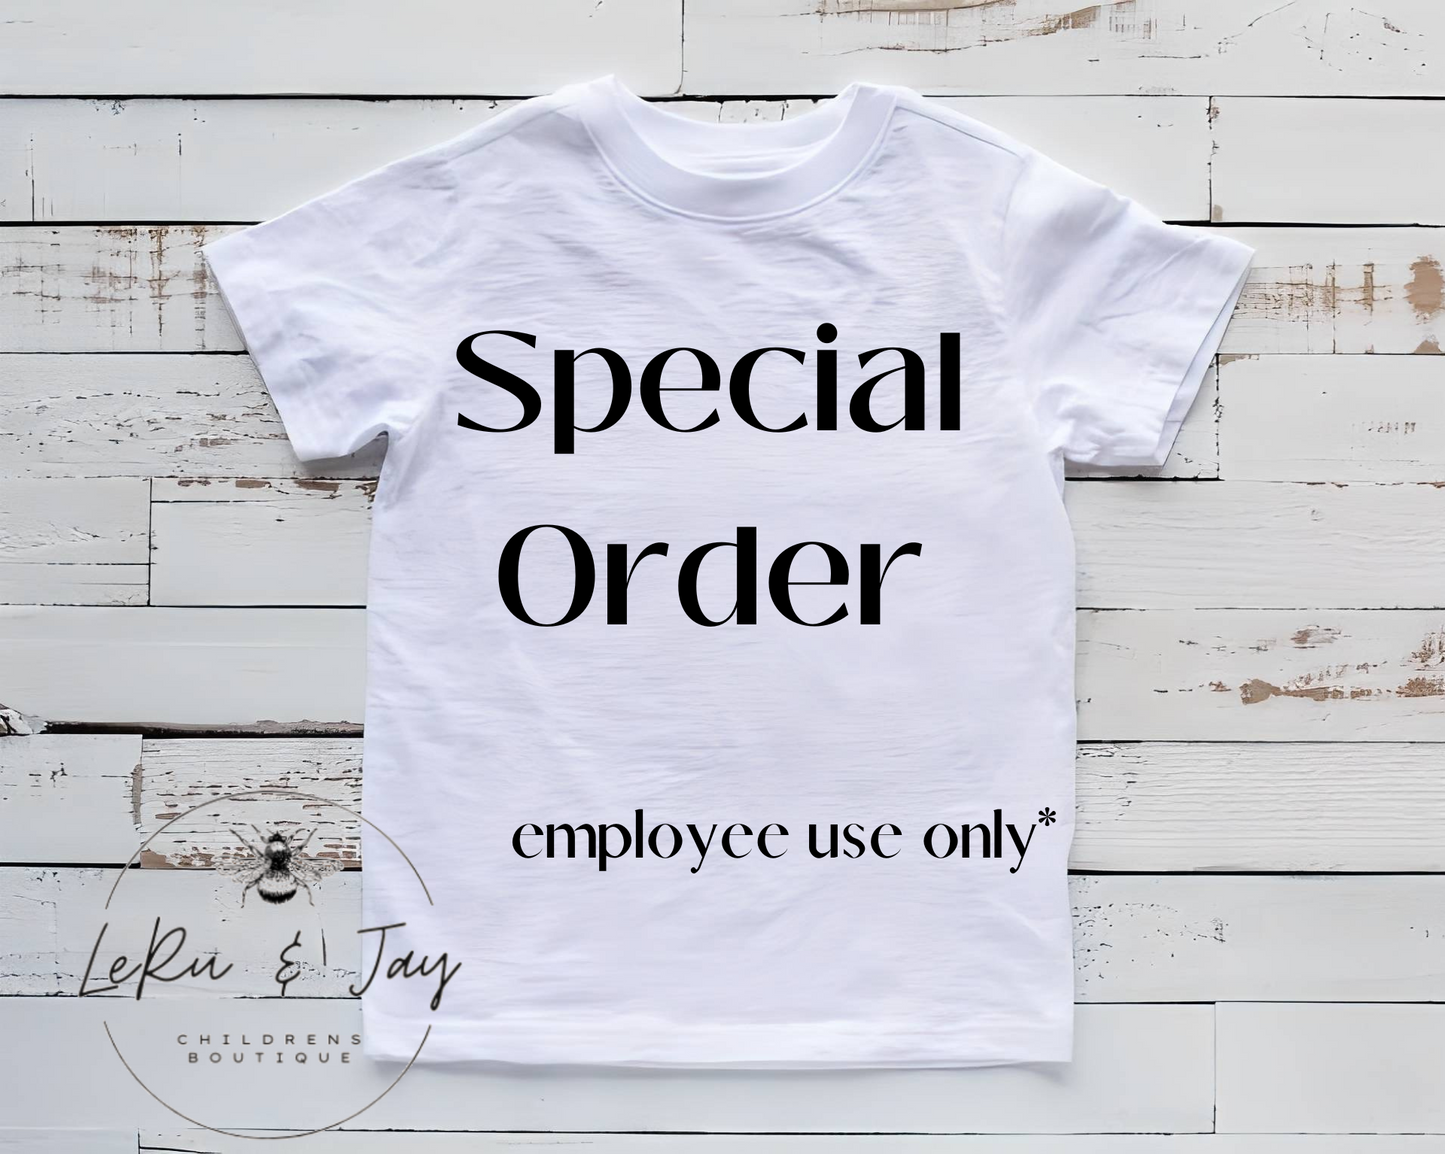 Special Order - event use only